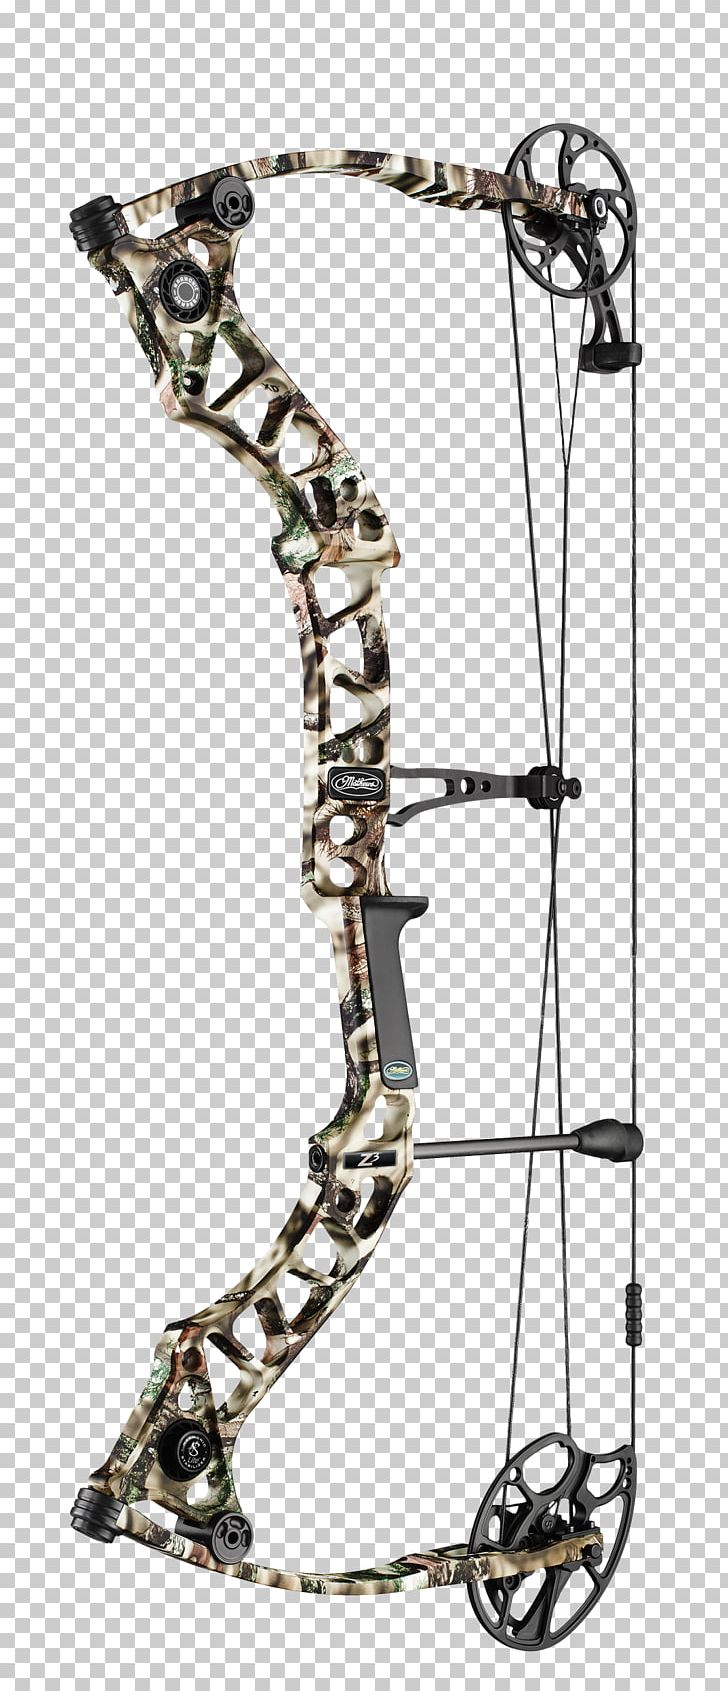 Sony Xperia Z3 Compound Bows Bow And Arrow Bowhunting Archery PNG, Clipart, Advanced Archery, Archery, Bear Archery, Bow, Bow And Arrow Free PNG Download